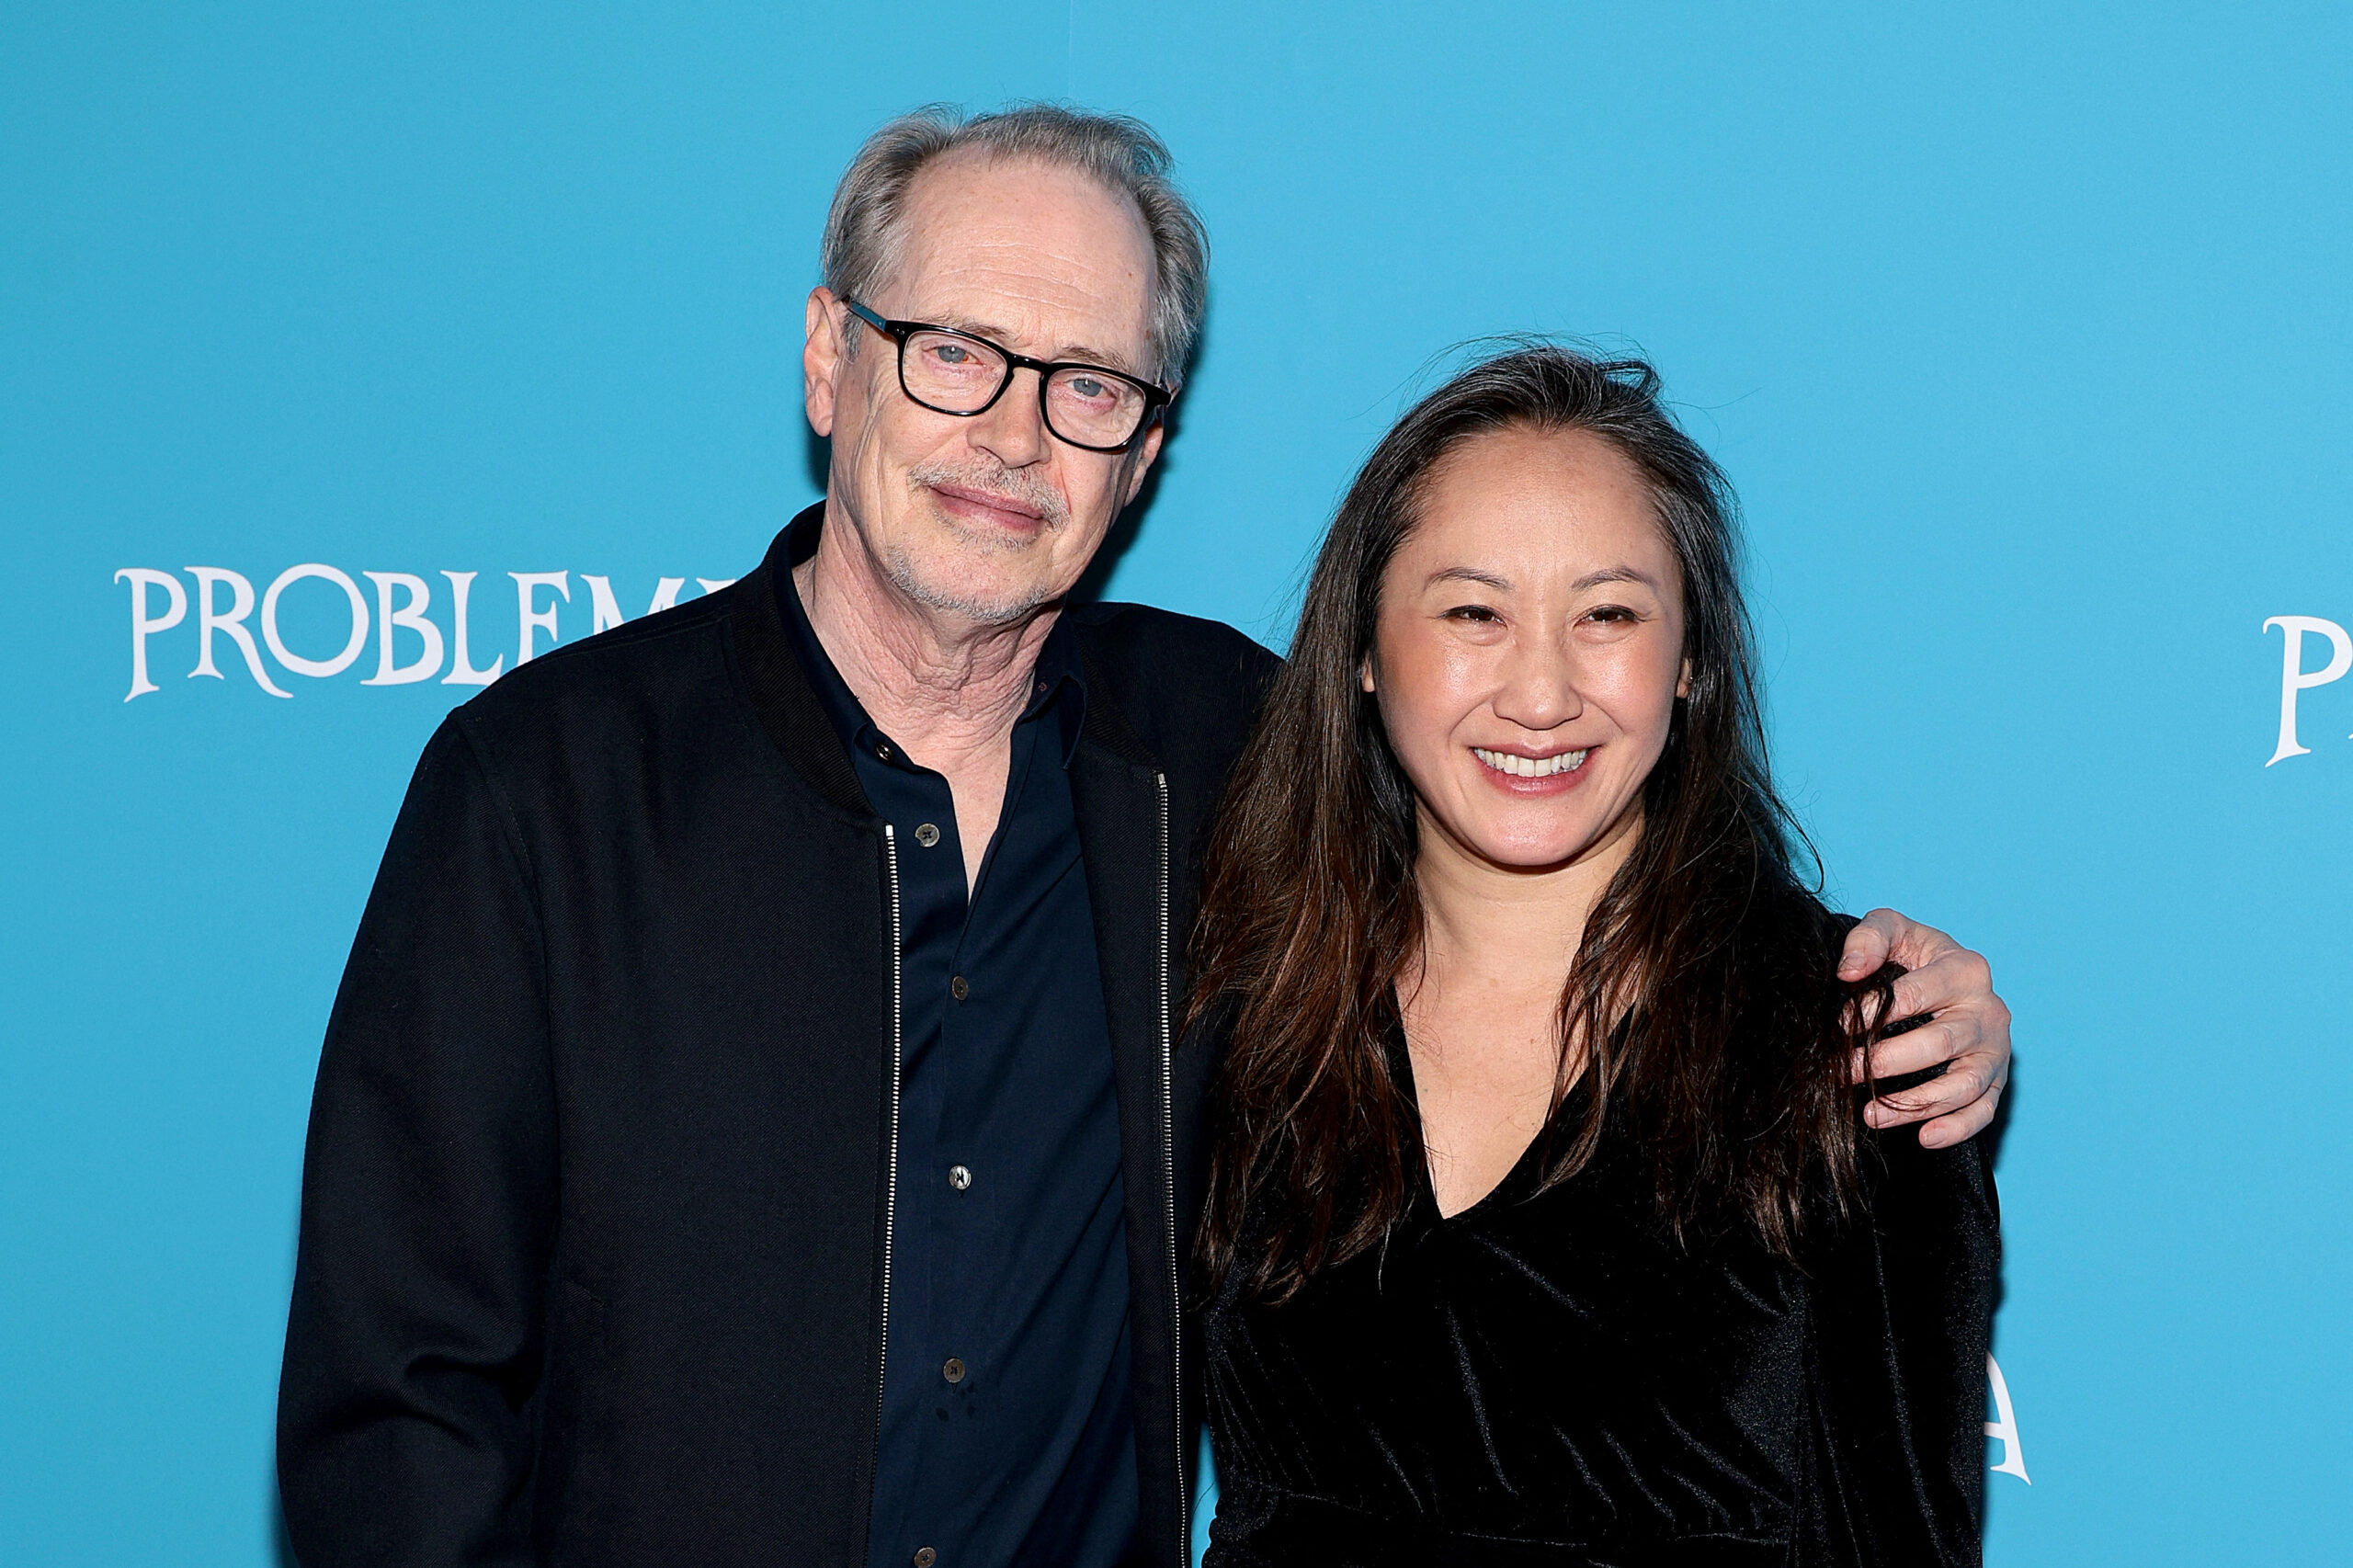 NEW YORK, NEW YORK - FEBRUARY 27: (L-R) Steve Buscemi and Karen Ho attend the "Problemista" New York Screening at Village East Cinema on February 27, 2024 in New York City.   Dimitrios Kambouris,Image: 851600468, License: Rights-managed, Restrictions: , Model Release: no, Credit line: Dimitrios Kambouris / Getty images / Profimedia